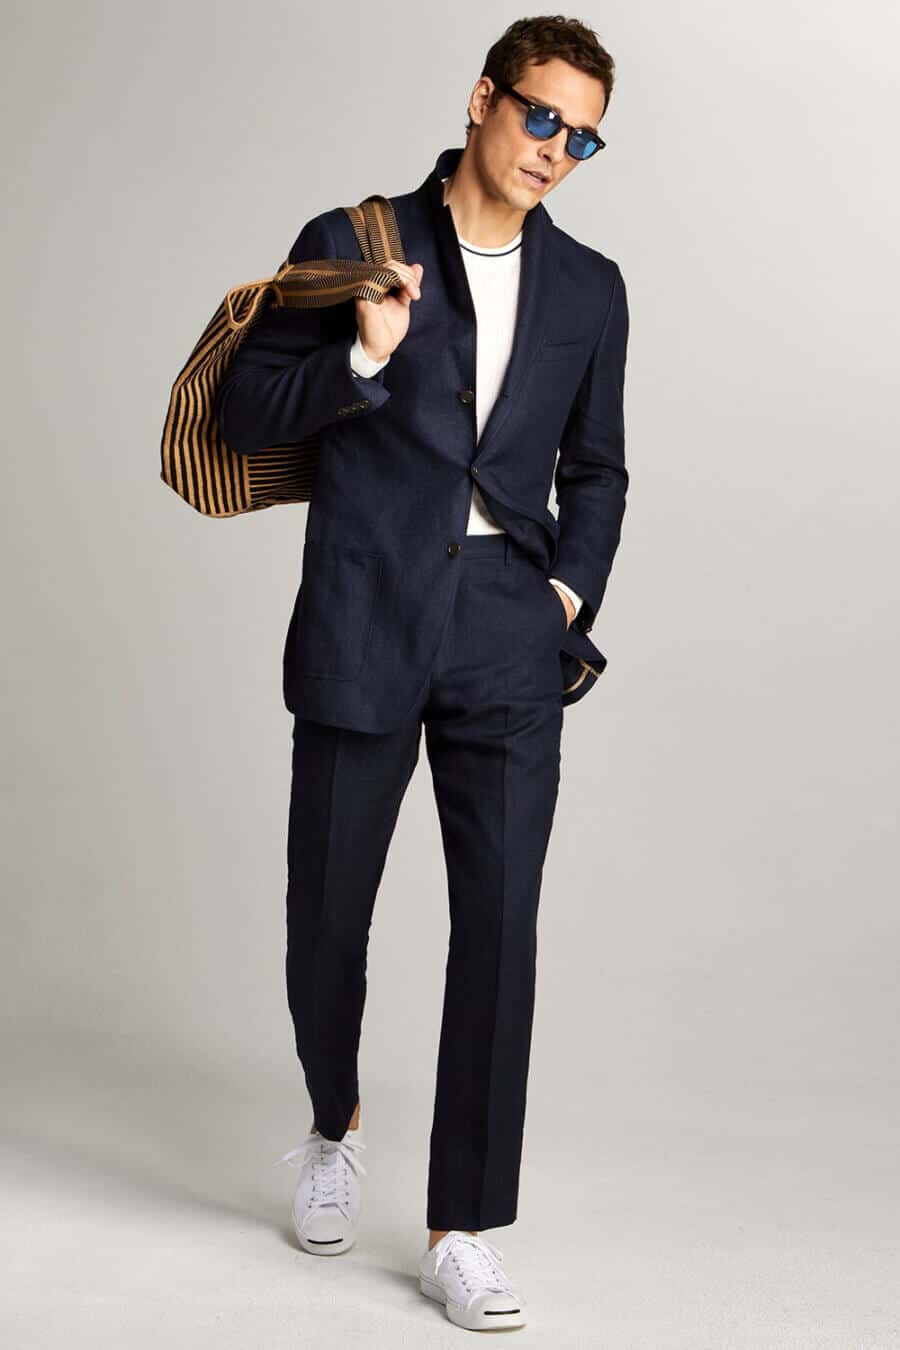 Men's navy suit, white top and white sneakers outfit